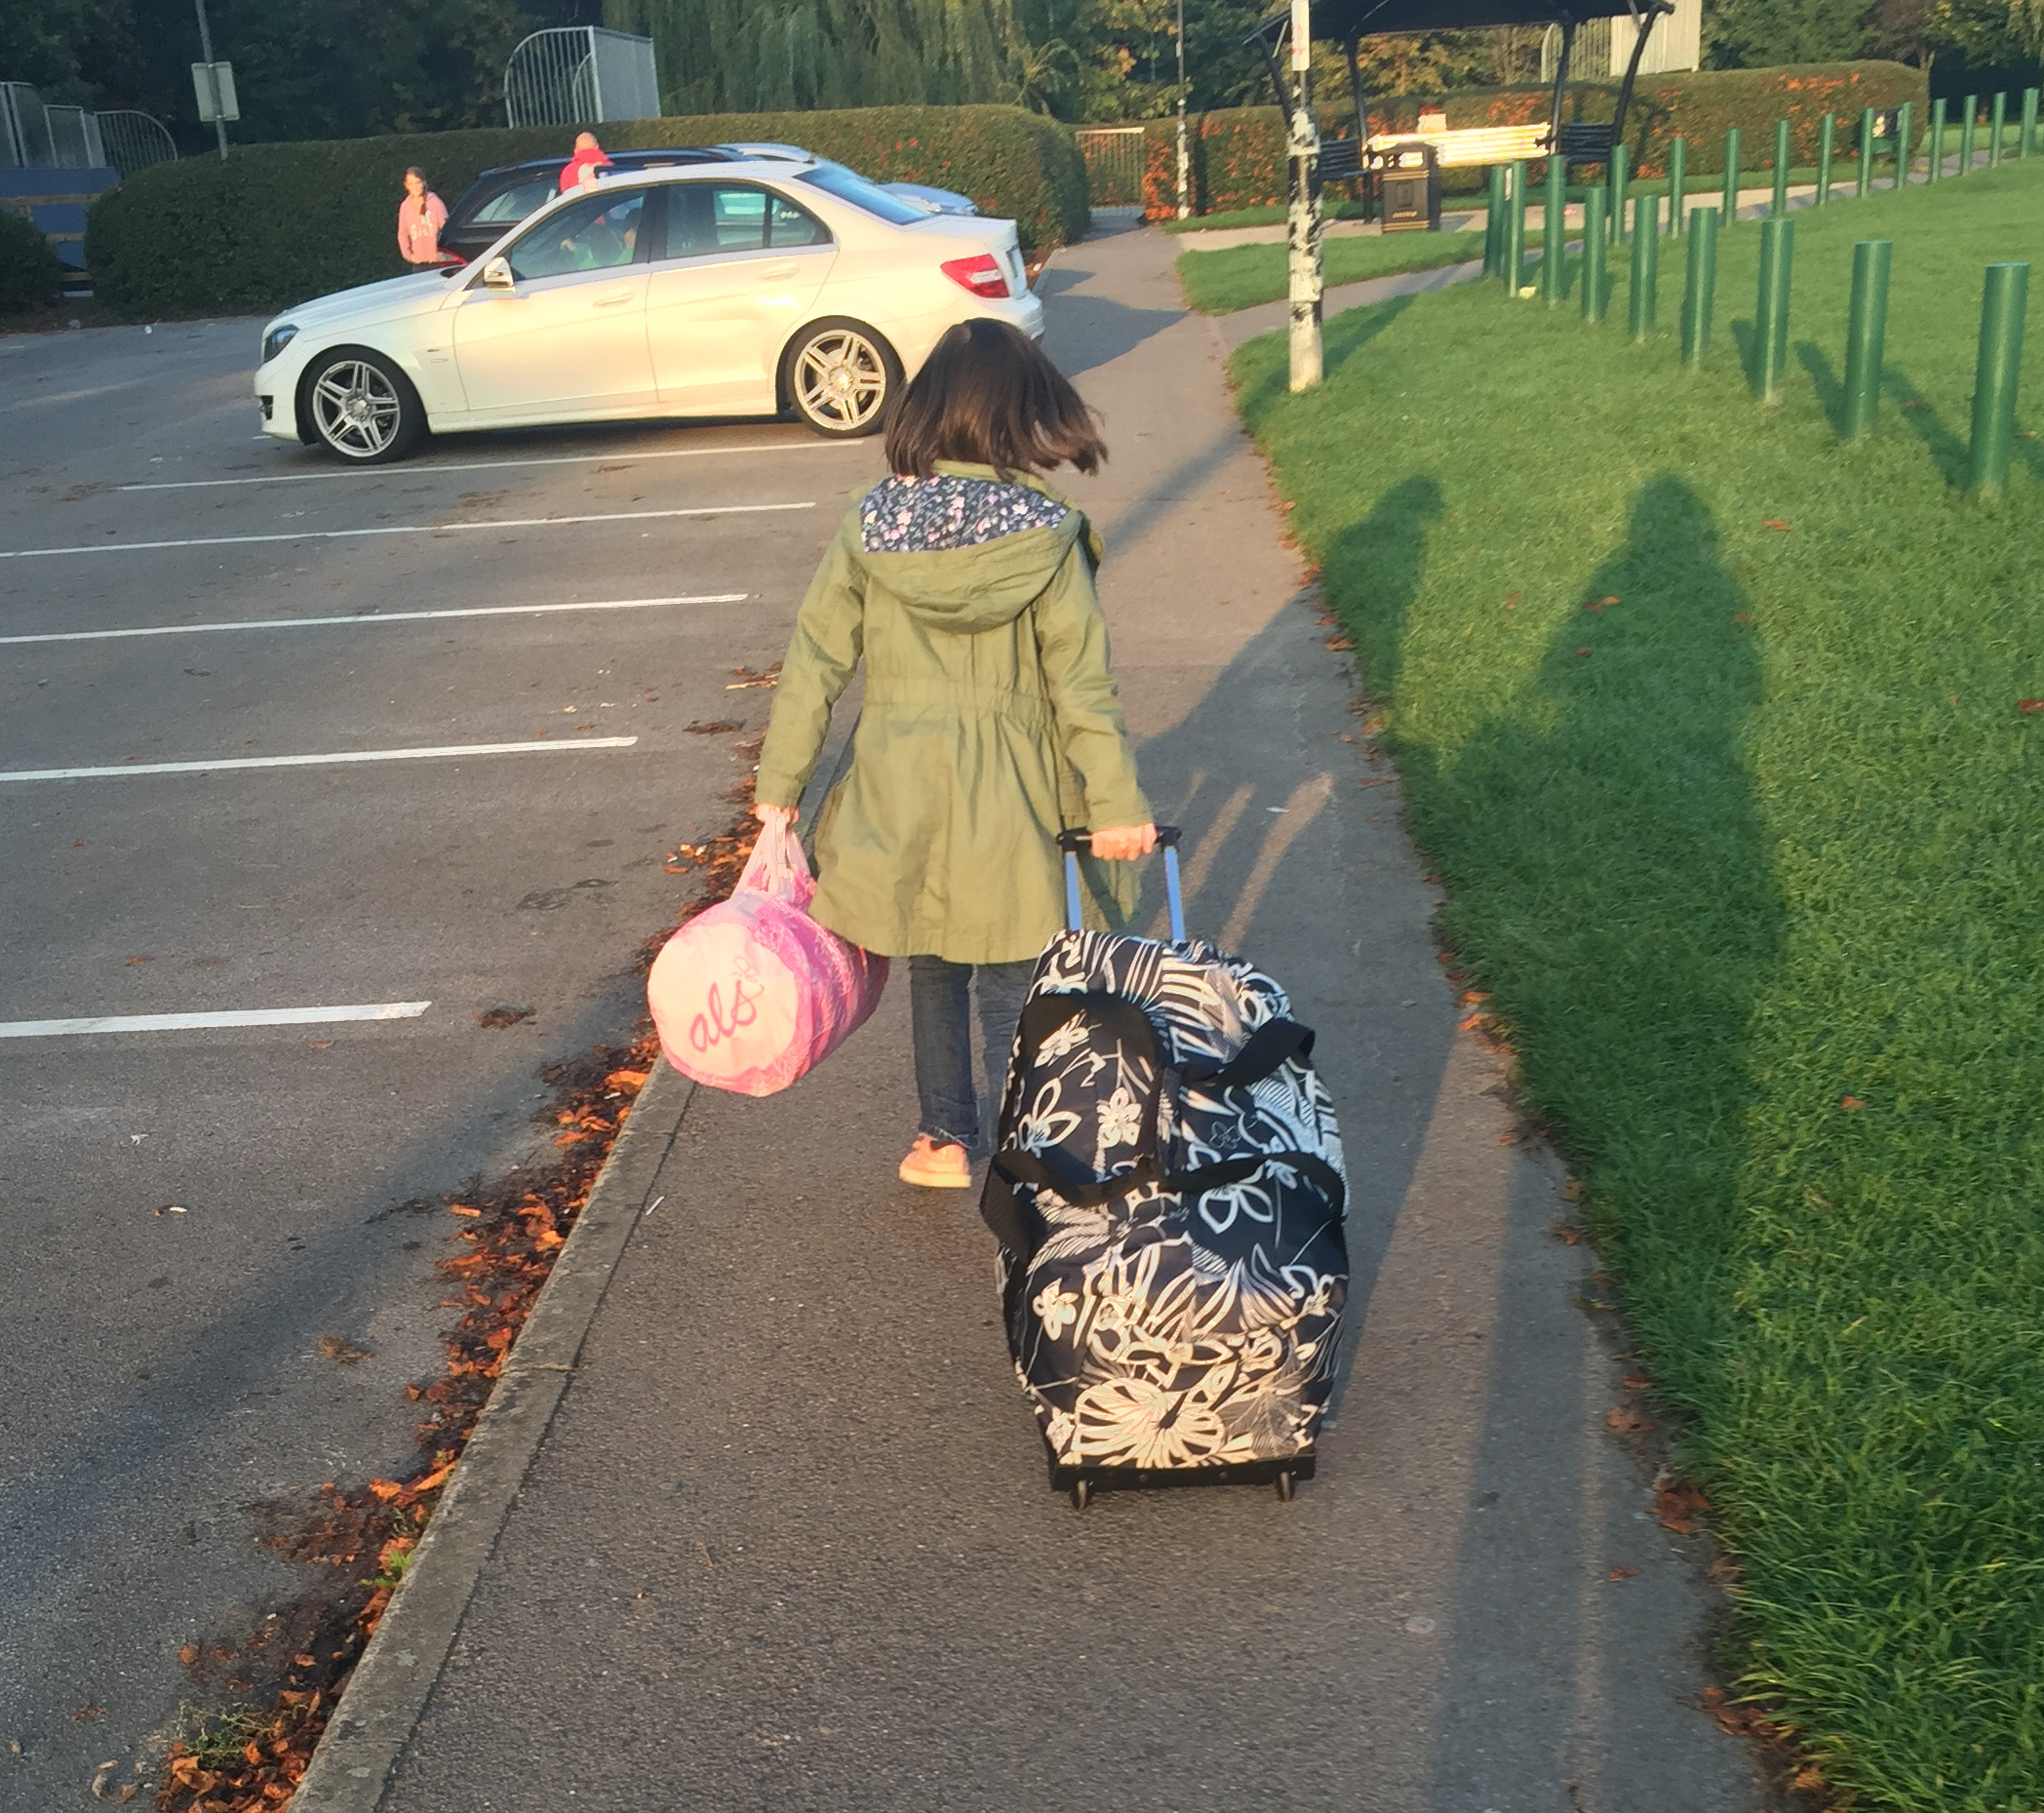 Tanzie heads off to her school trip with her bags.